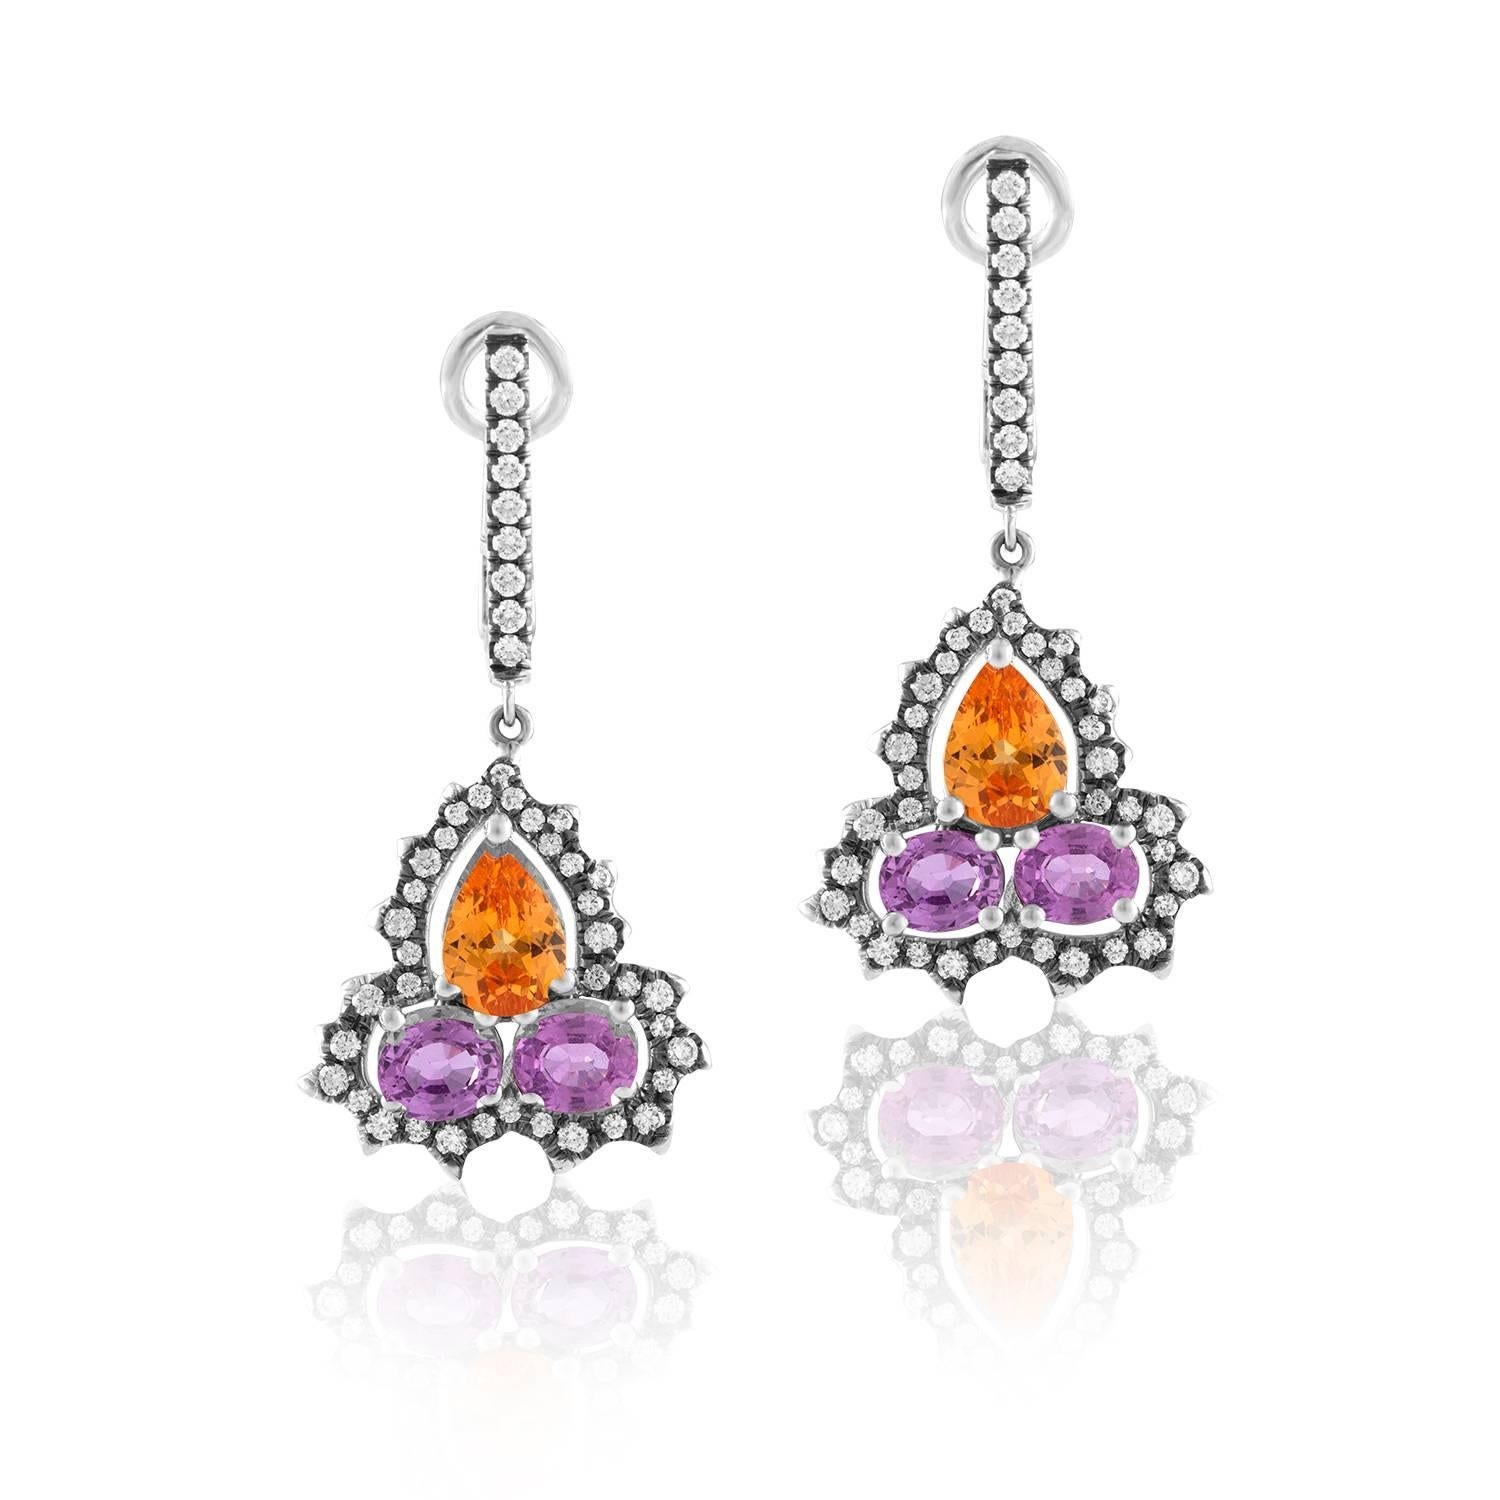 The 18 K white Gold Dangling Earrings, with Mandarin Garnets, Purple/Pink Sapphires and green Garnets, are dynamic earrings by Bella Campbell for Campbellian Collection 